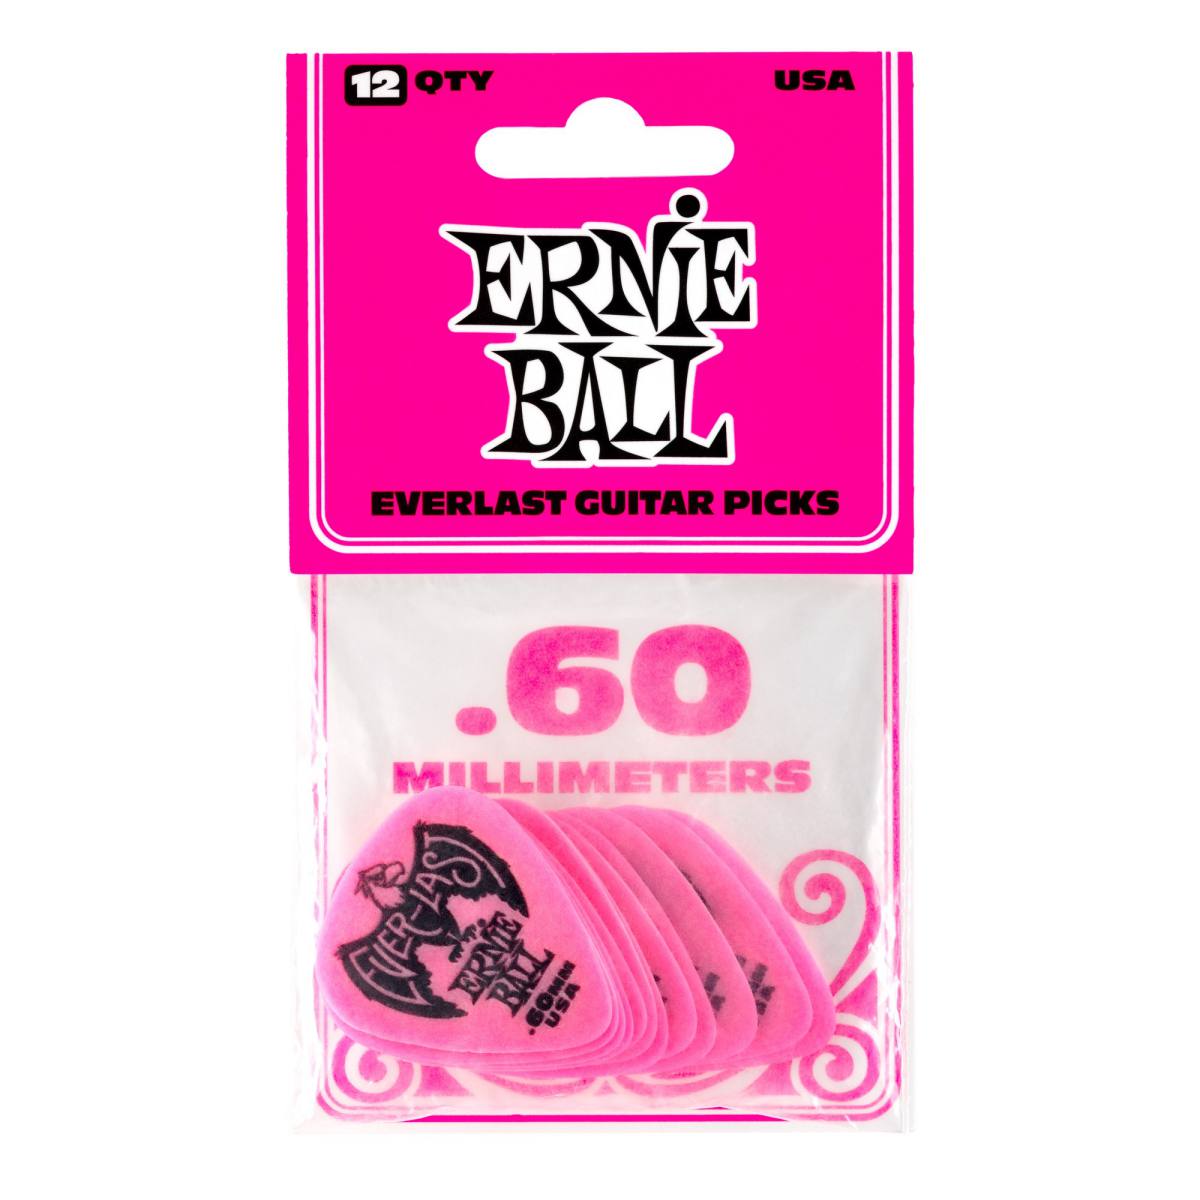 An image of Ernie Ball Everlast 0.60mm Guitar Picks Pink (Pack of 12) - Gift for a Guitarist